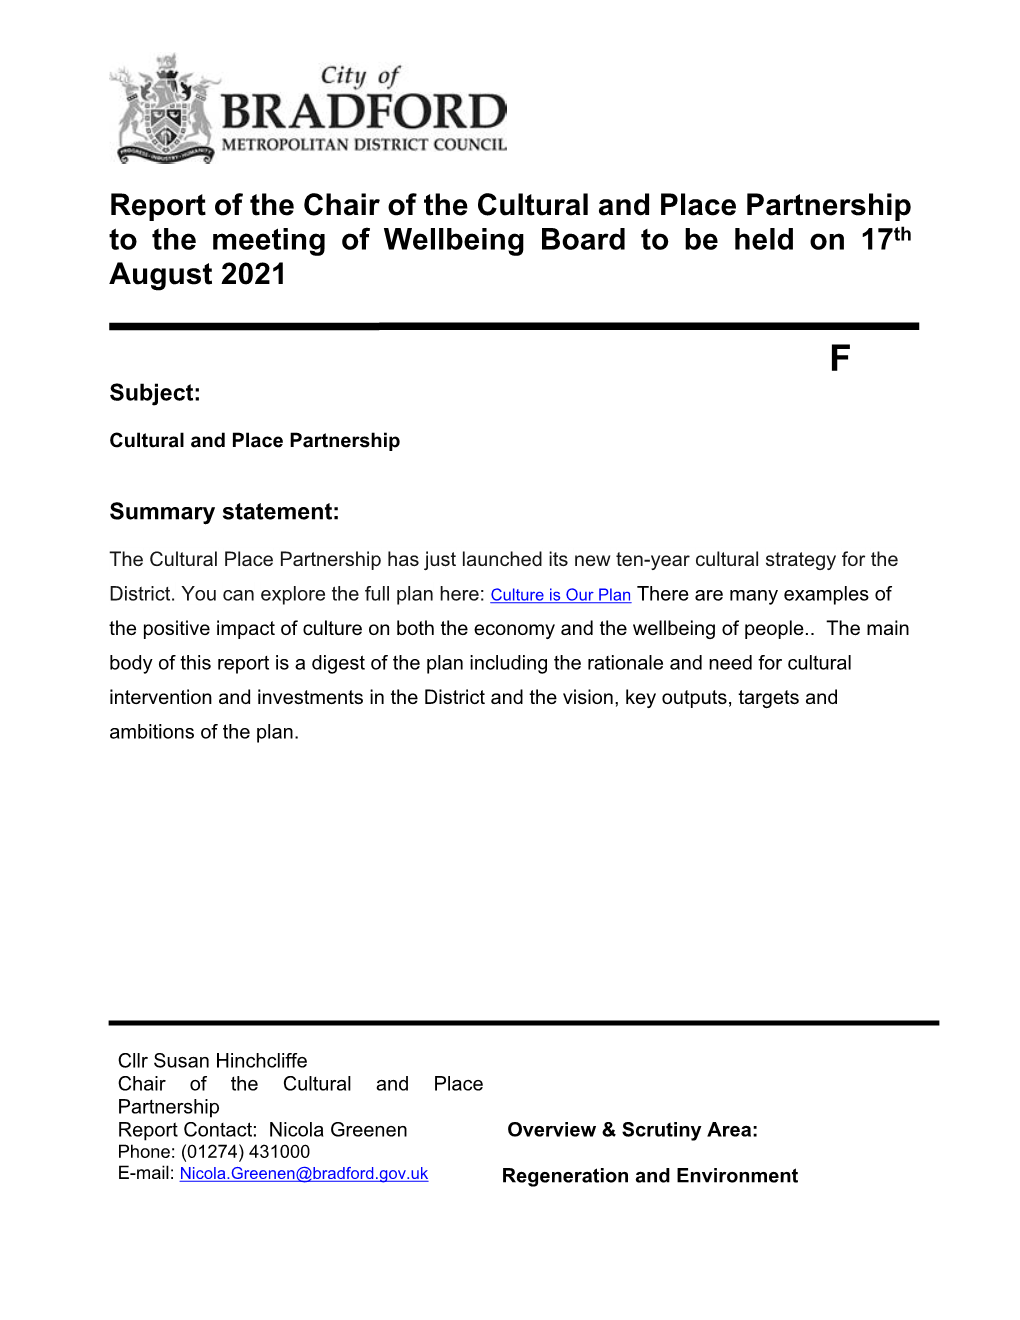 Cultural and Place Partnership Pdf 400 Kb